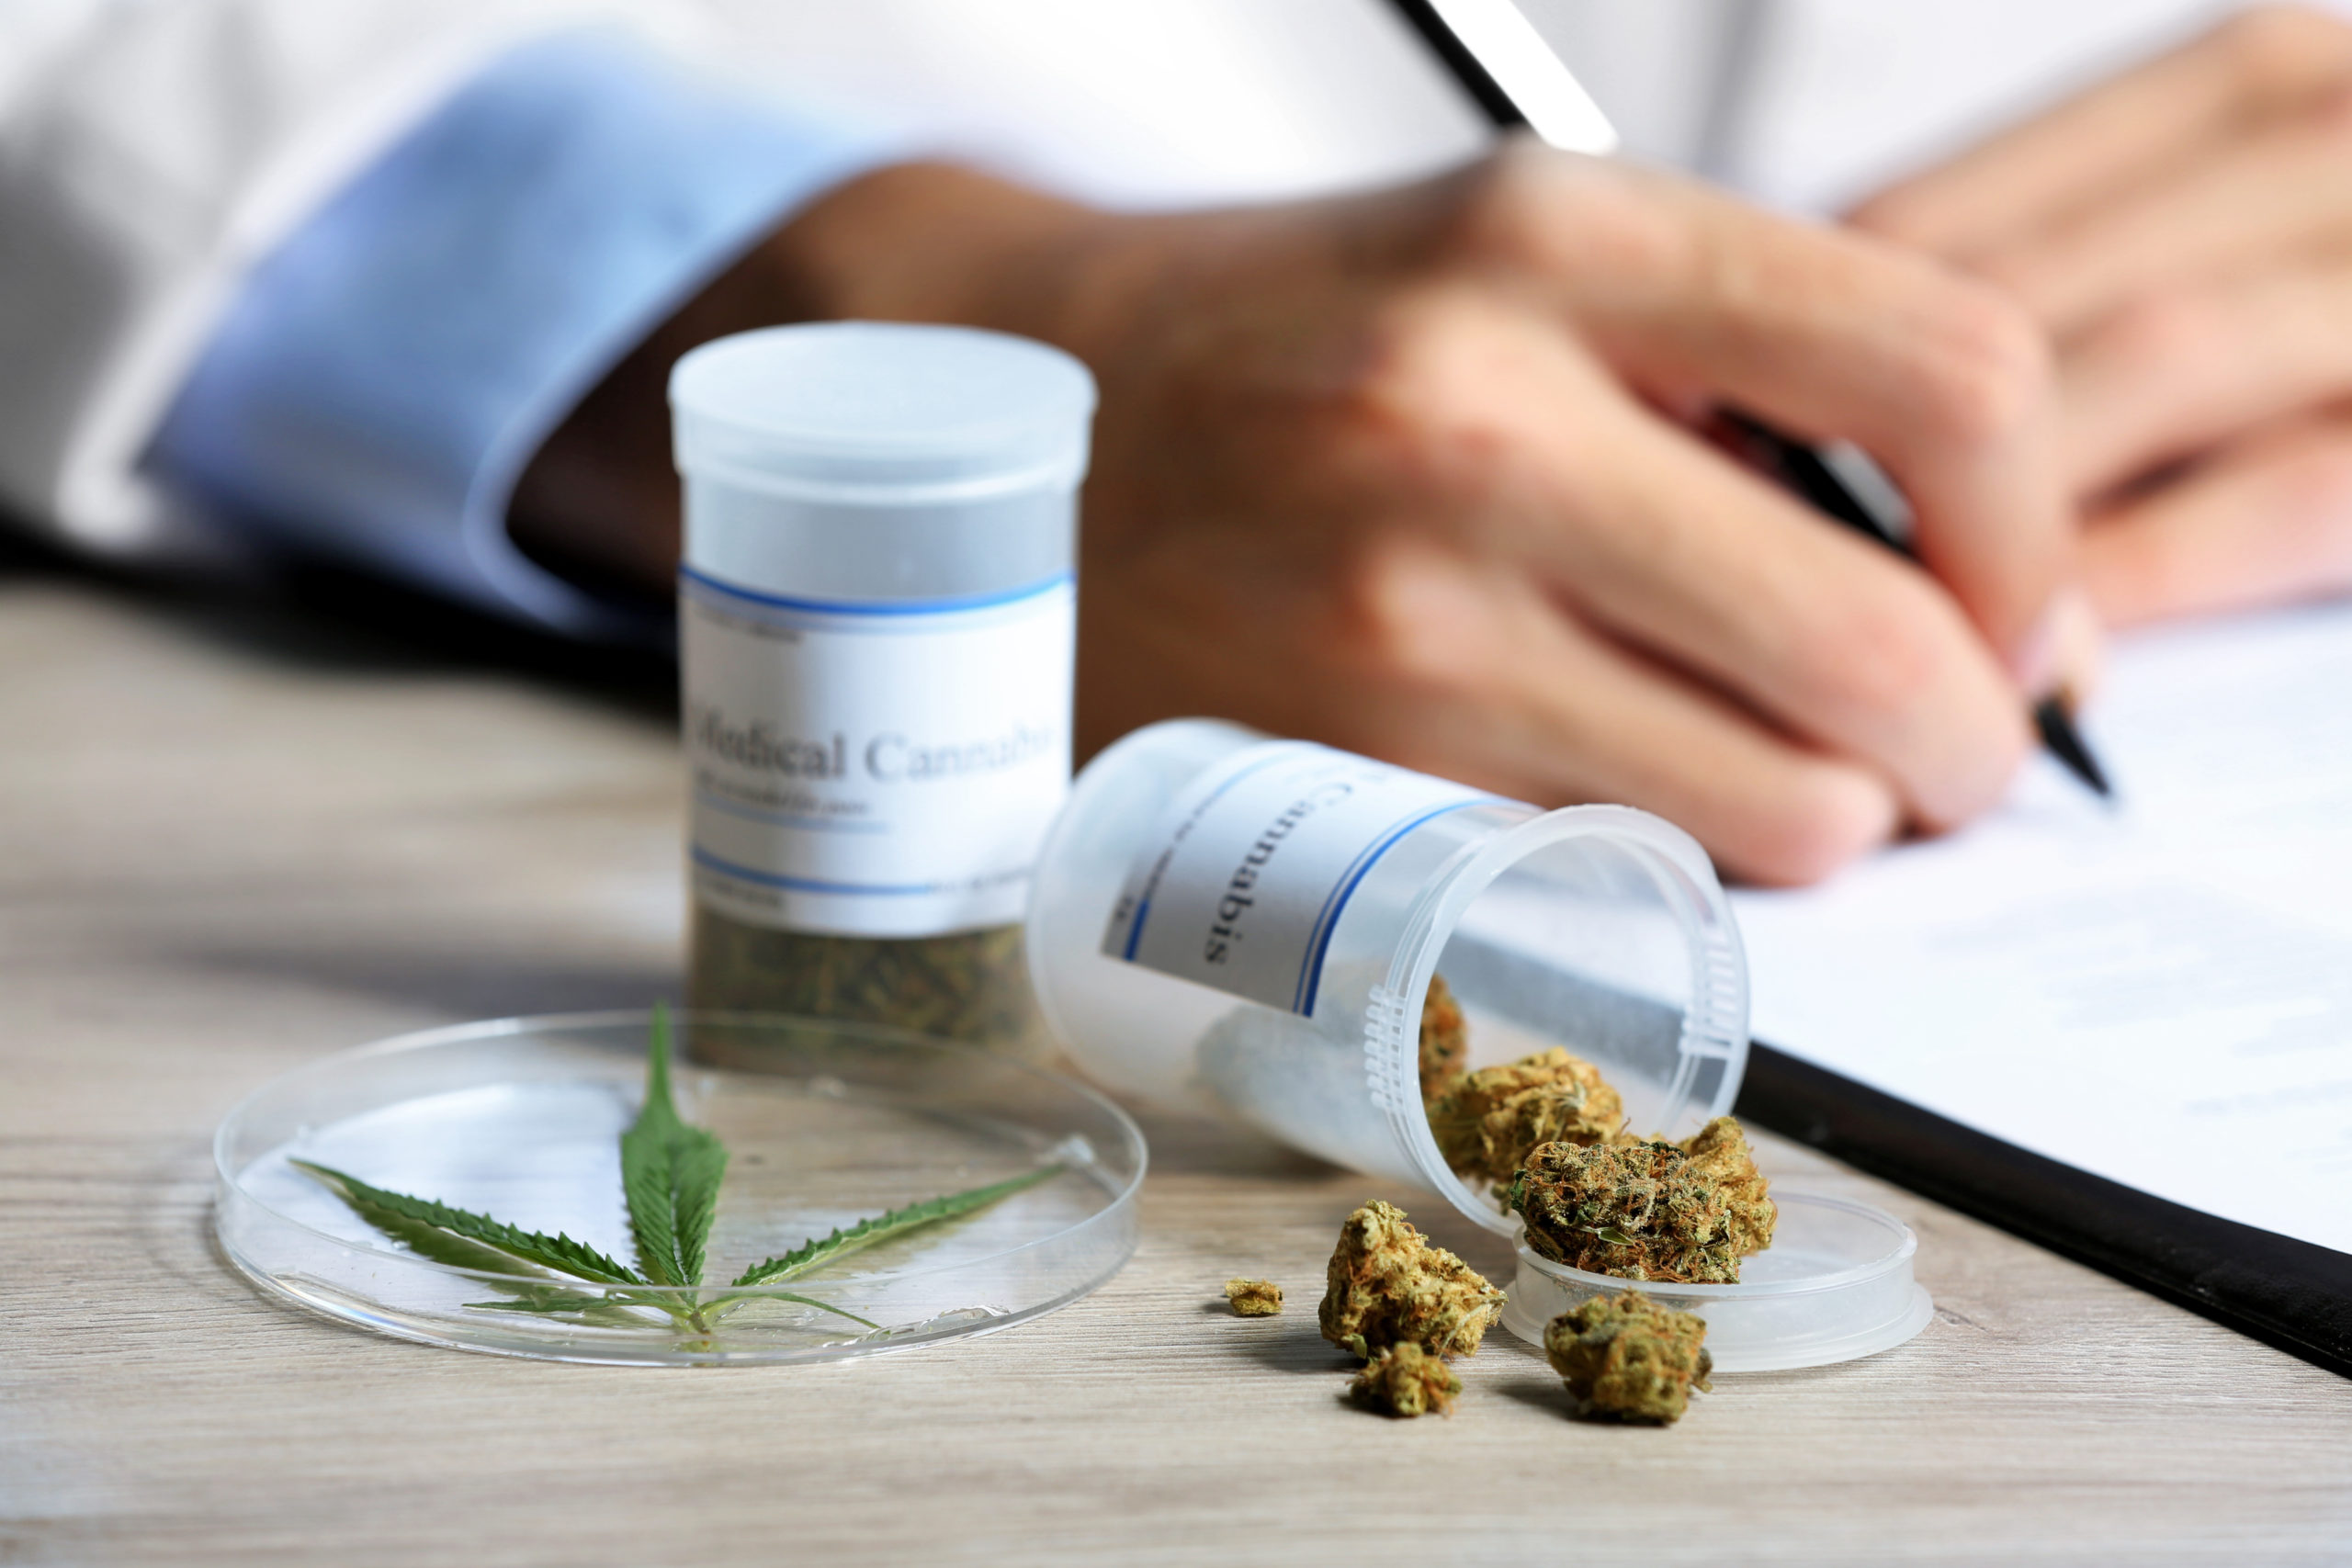 Read more about the article Scotland Opens First Medical Cannabis Clinic to Treat Chronic Pain.